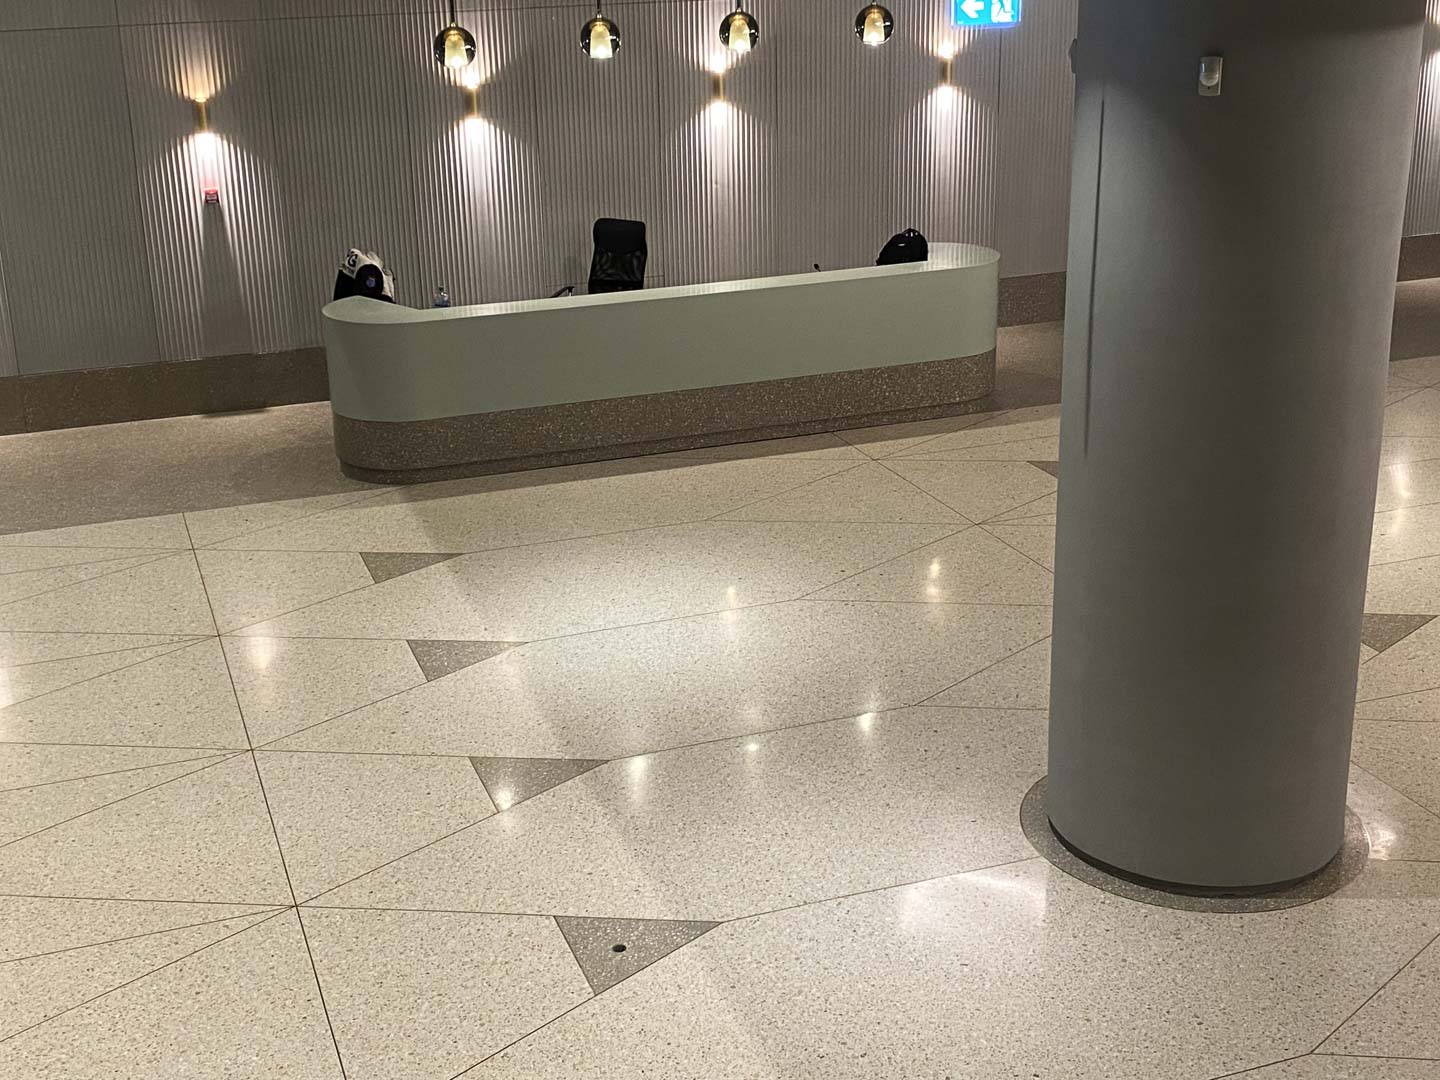 Tandem Office Building - an elegant design with terrazzo in the reception area, lobby lifts, stairs, and covings.